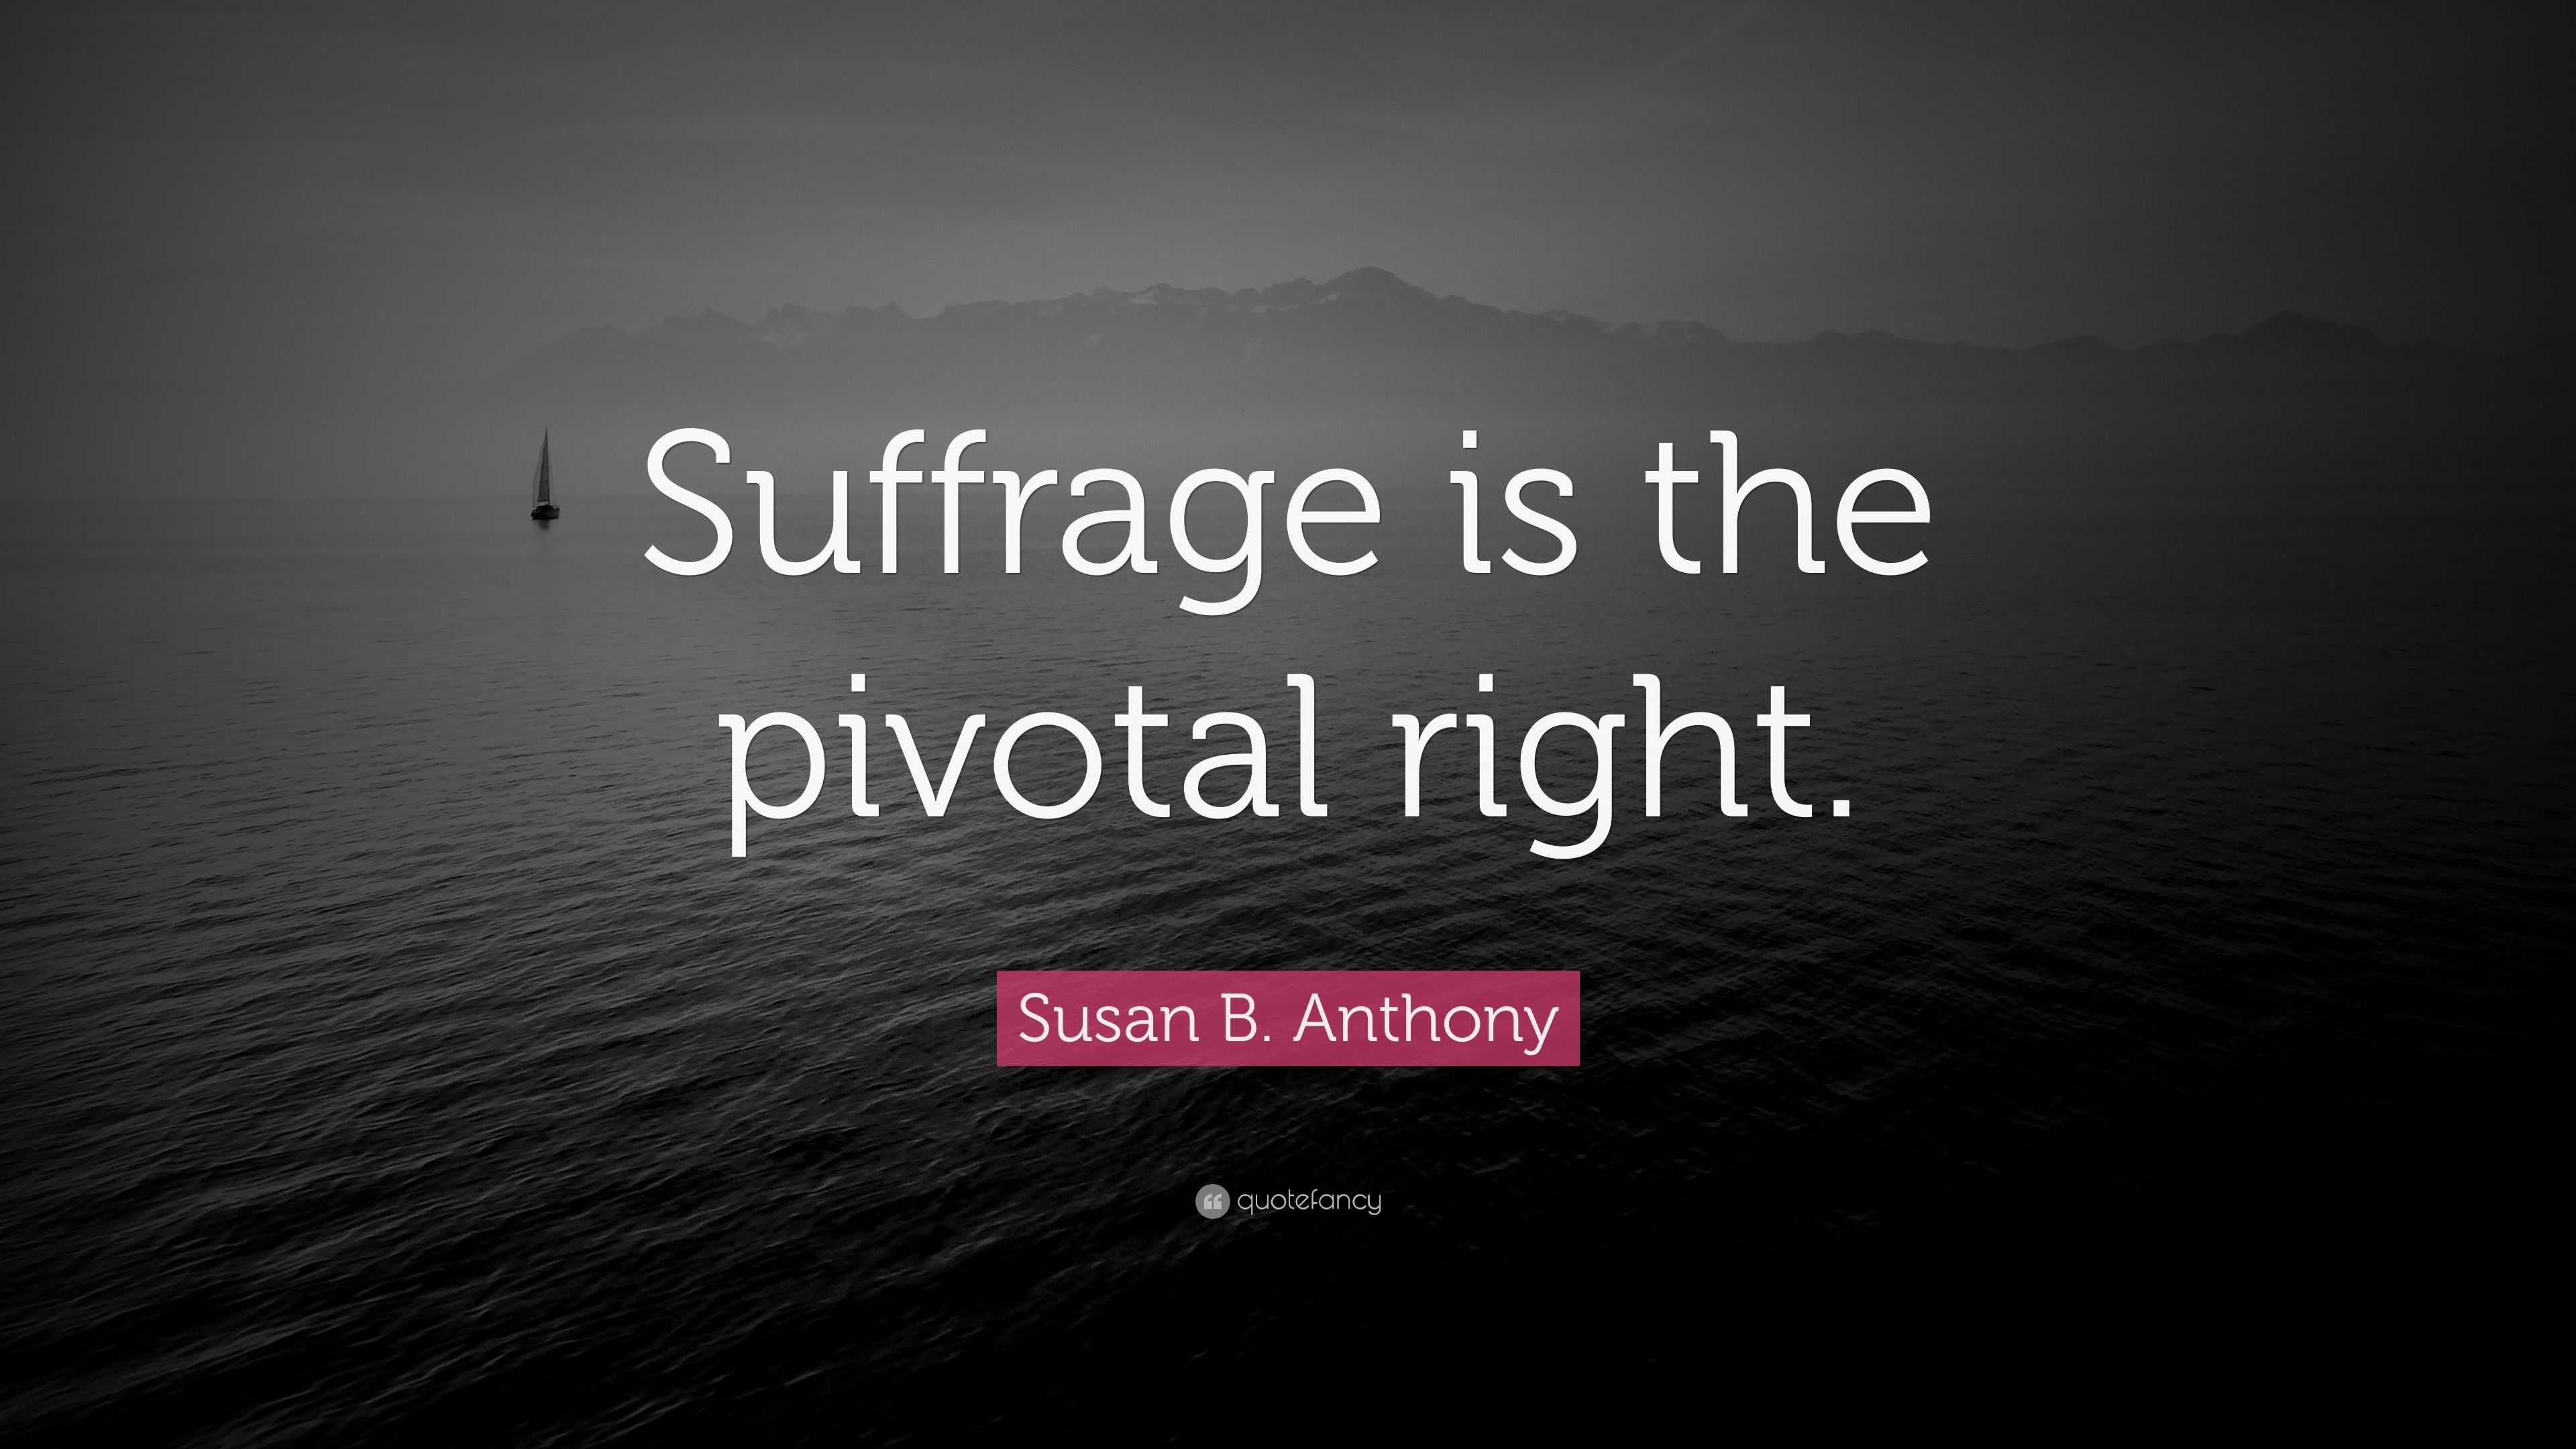 Susan B. Anthony Quote: “Suffrage is the pivotal right.”